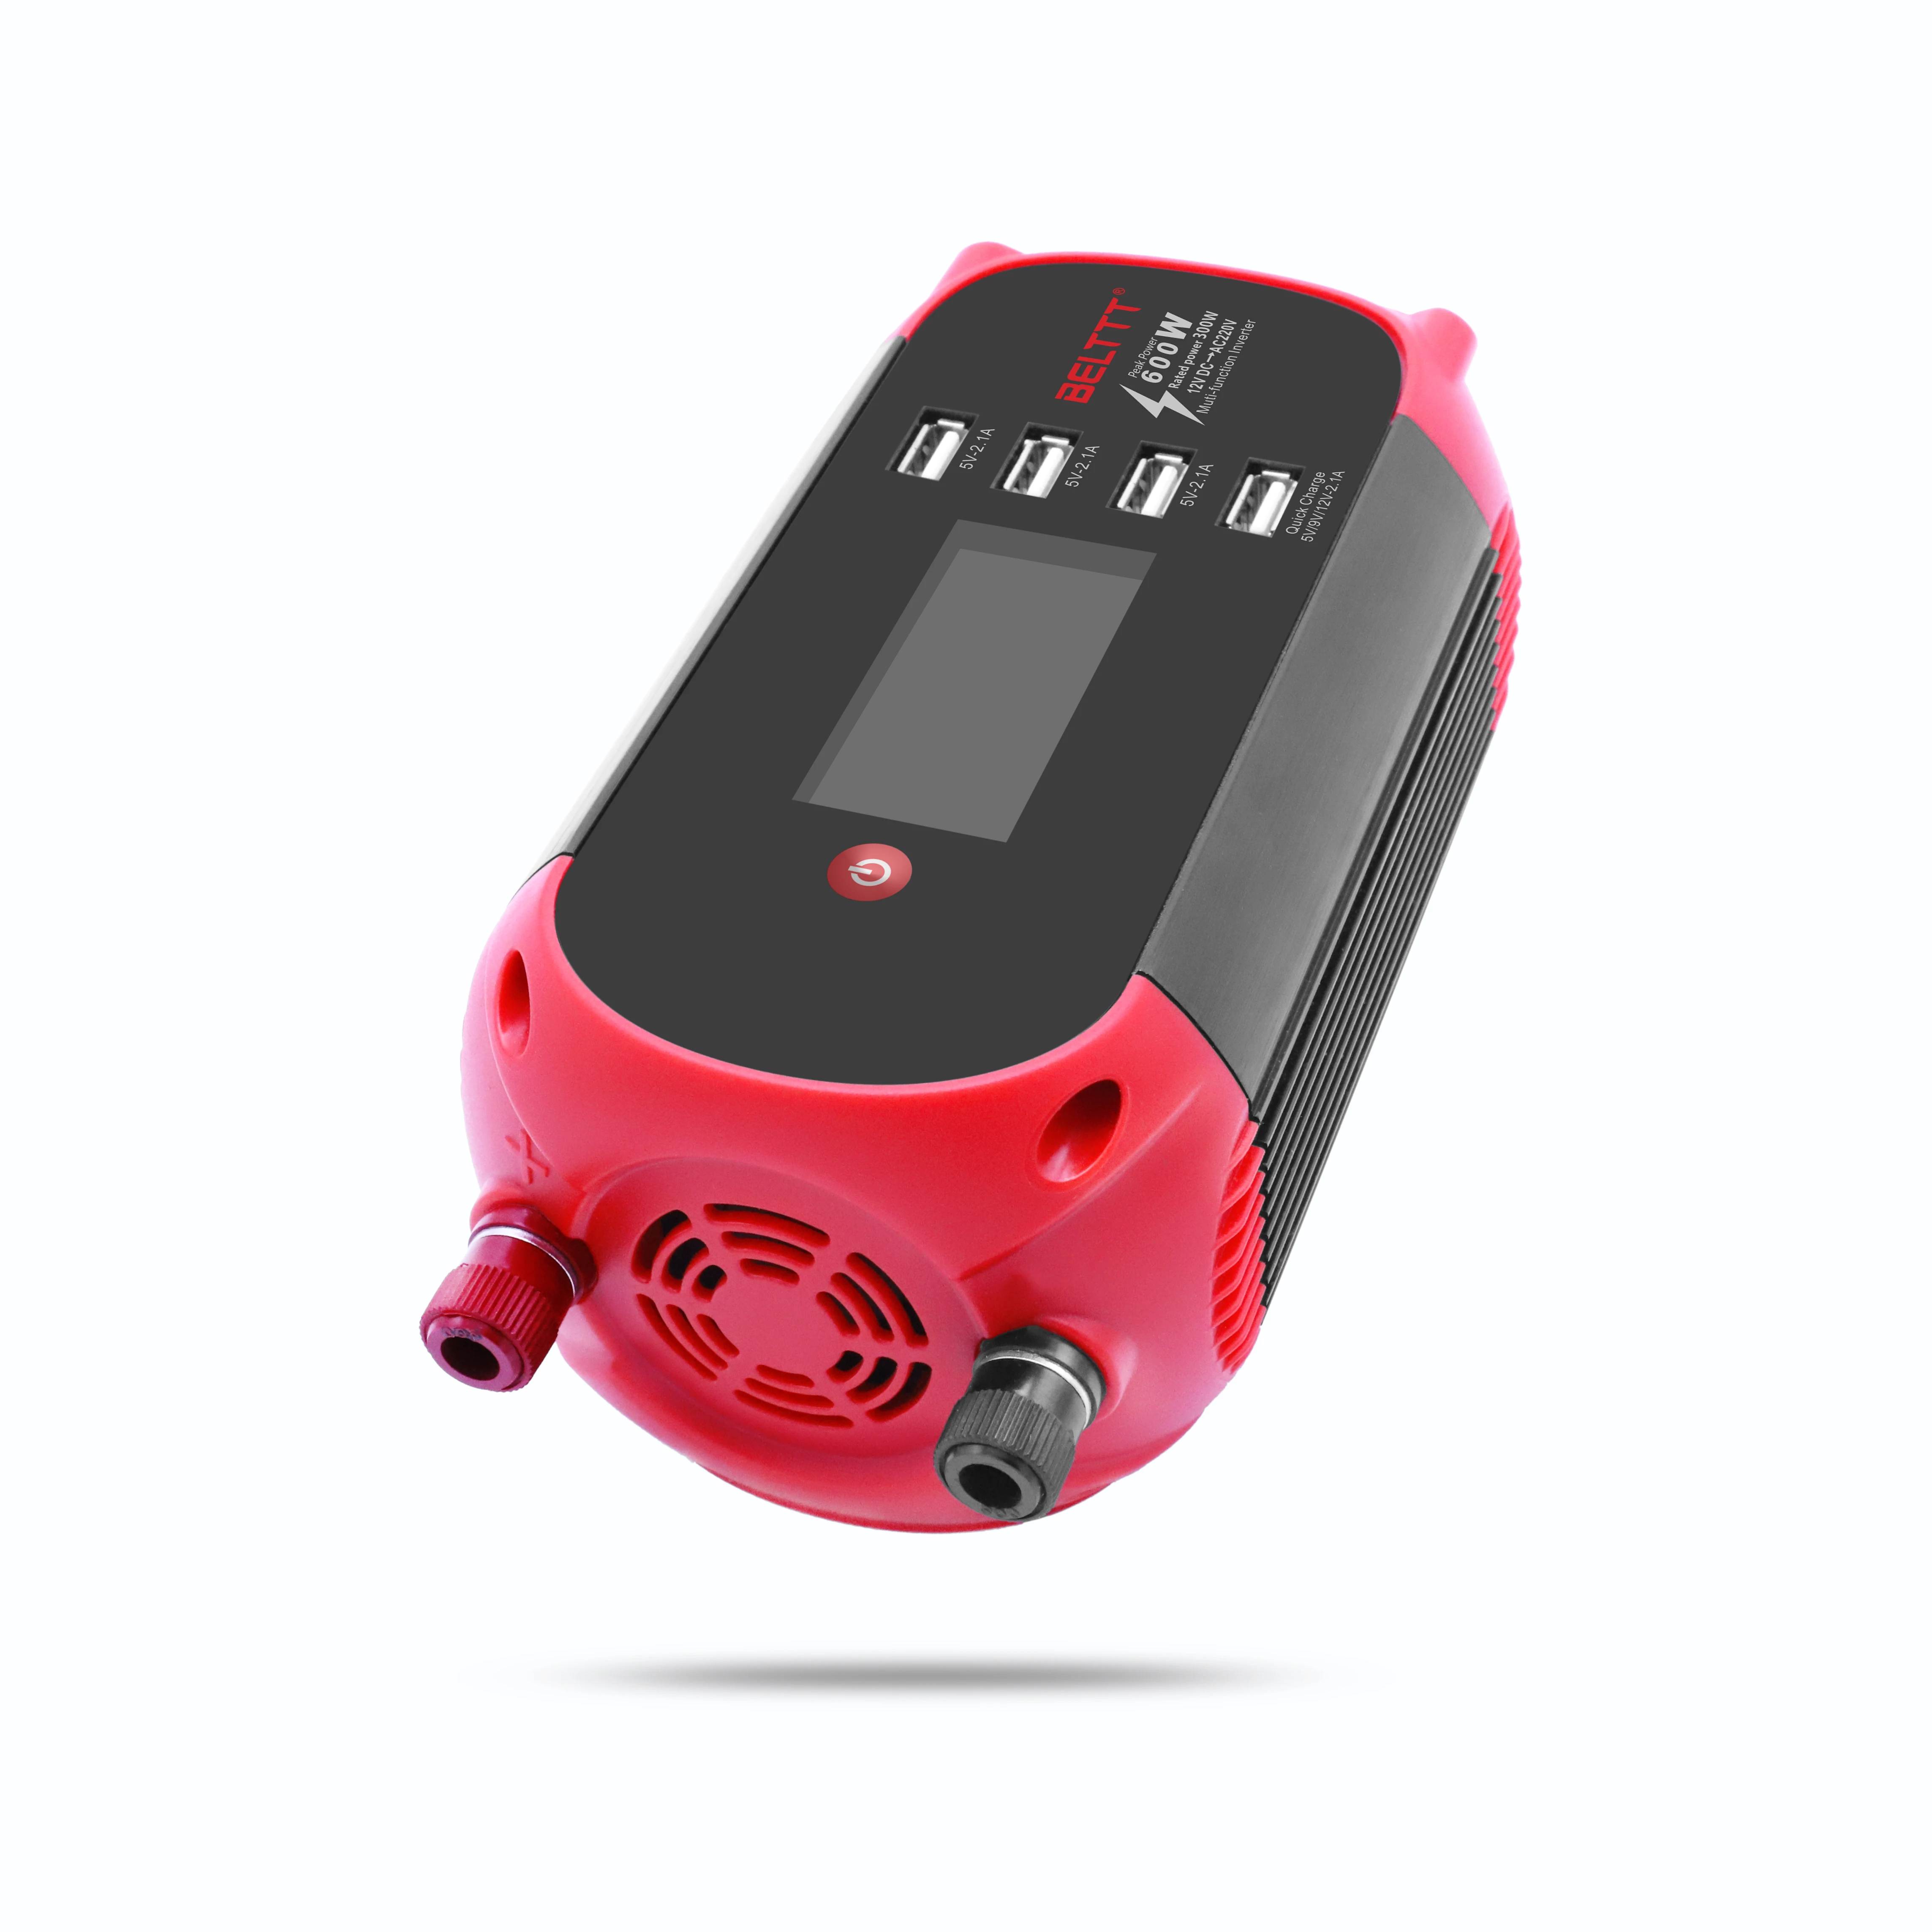 
BELTTT continuous 300w 12v dc to 110v ac car 600w power inverter 